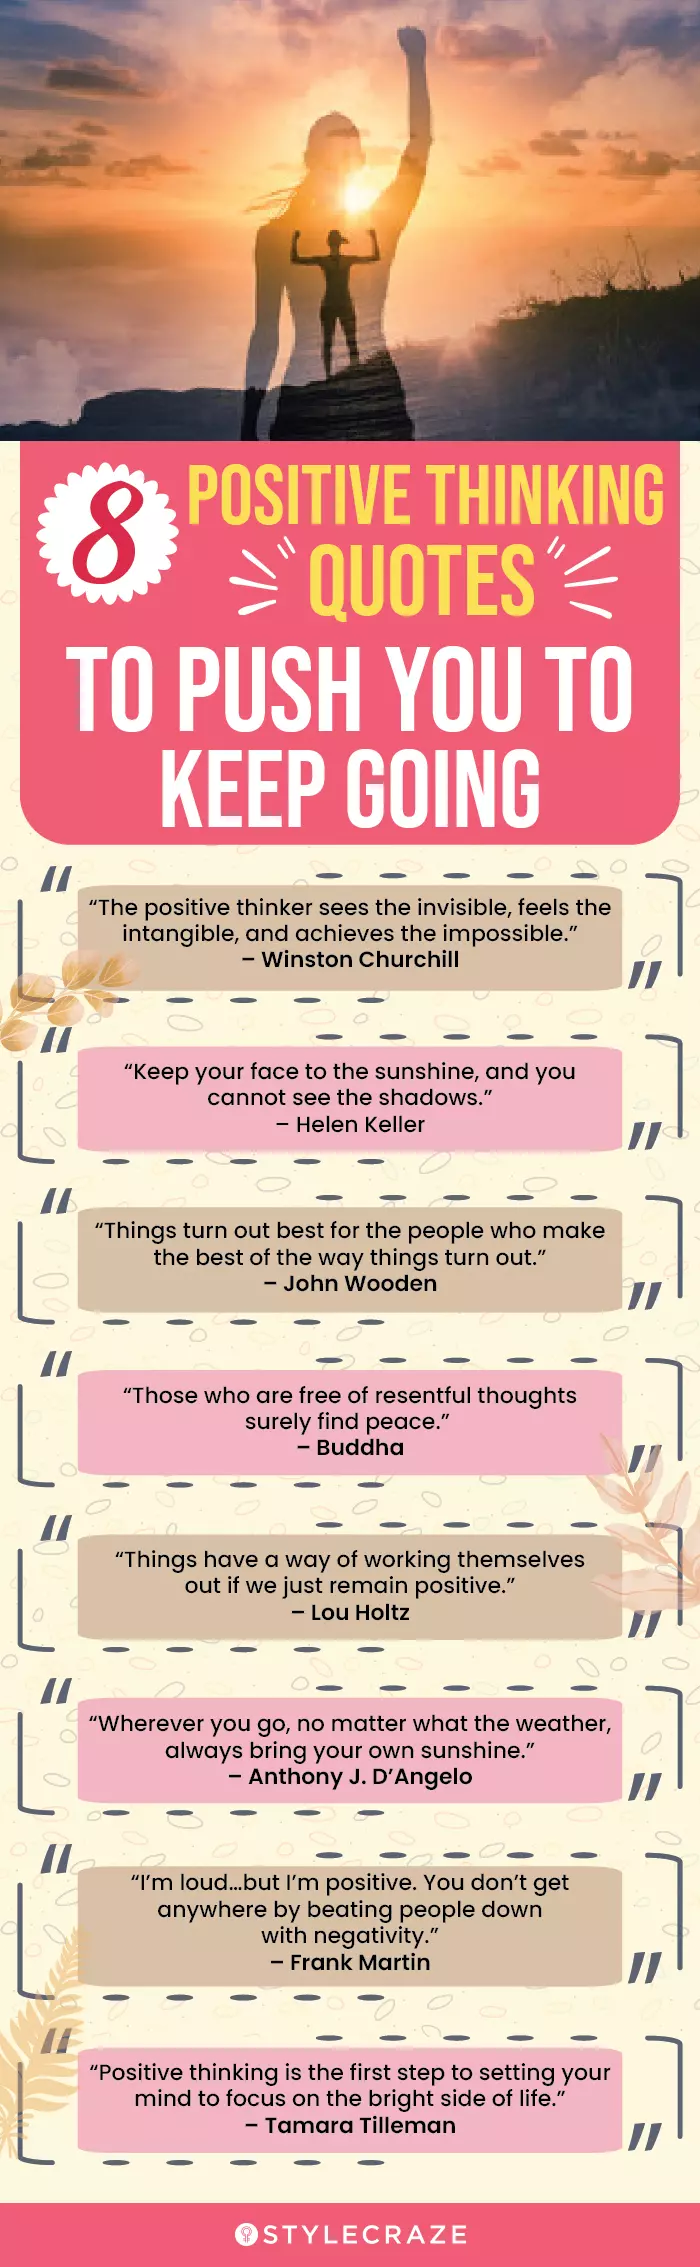 8 positive thinking quotes to push you to keep going (infographic)